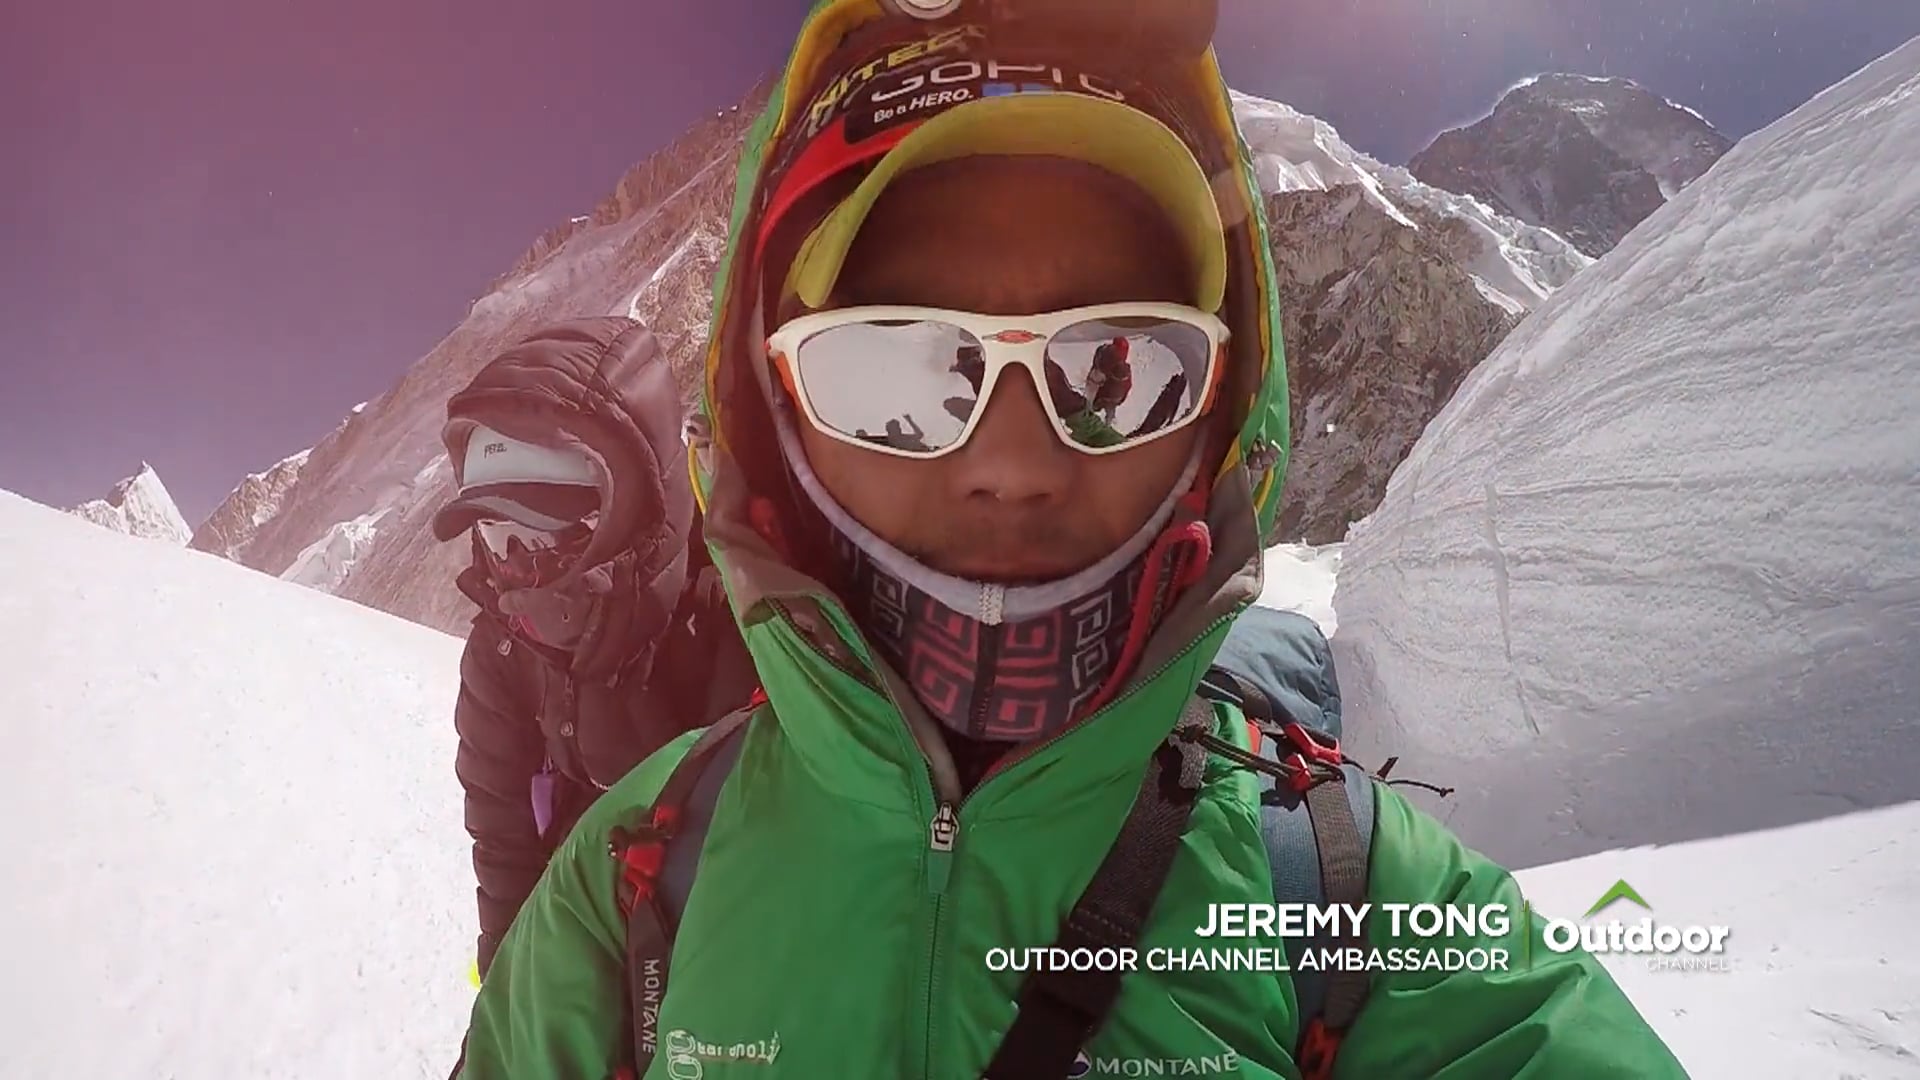 Outdoor Channel - Ambassador Jeremy Tong 2021 Promo